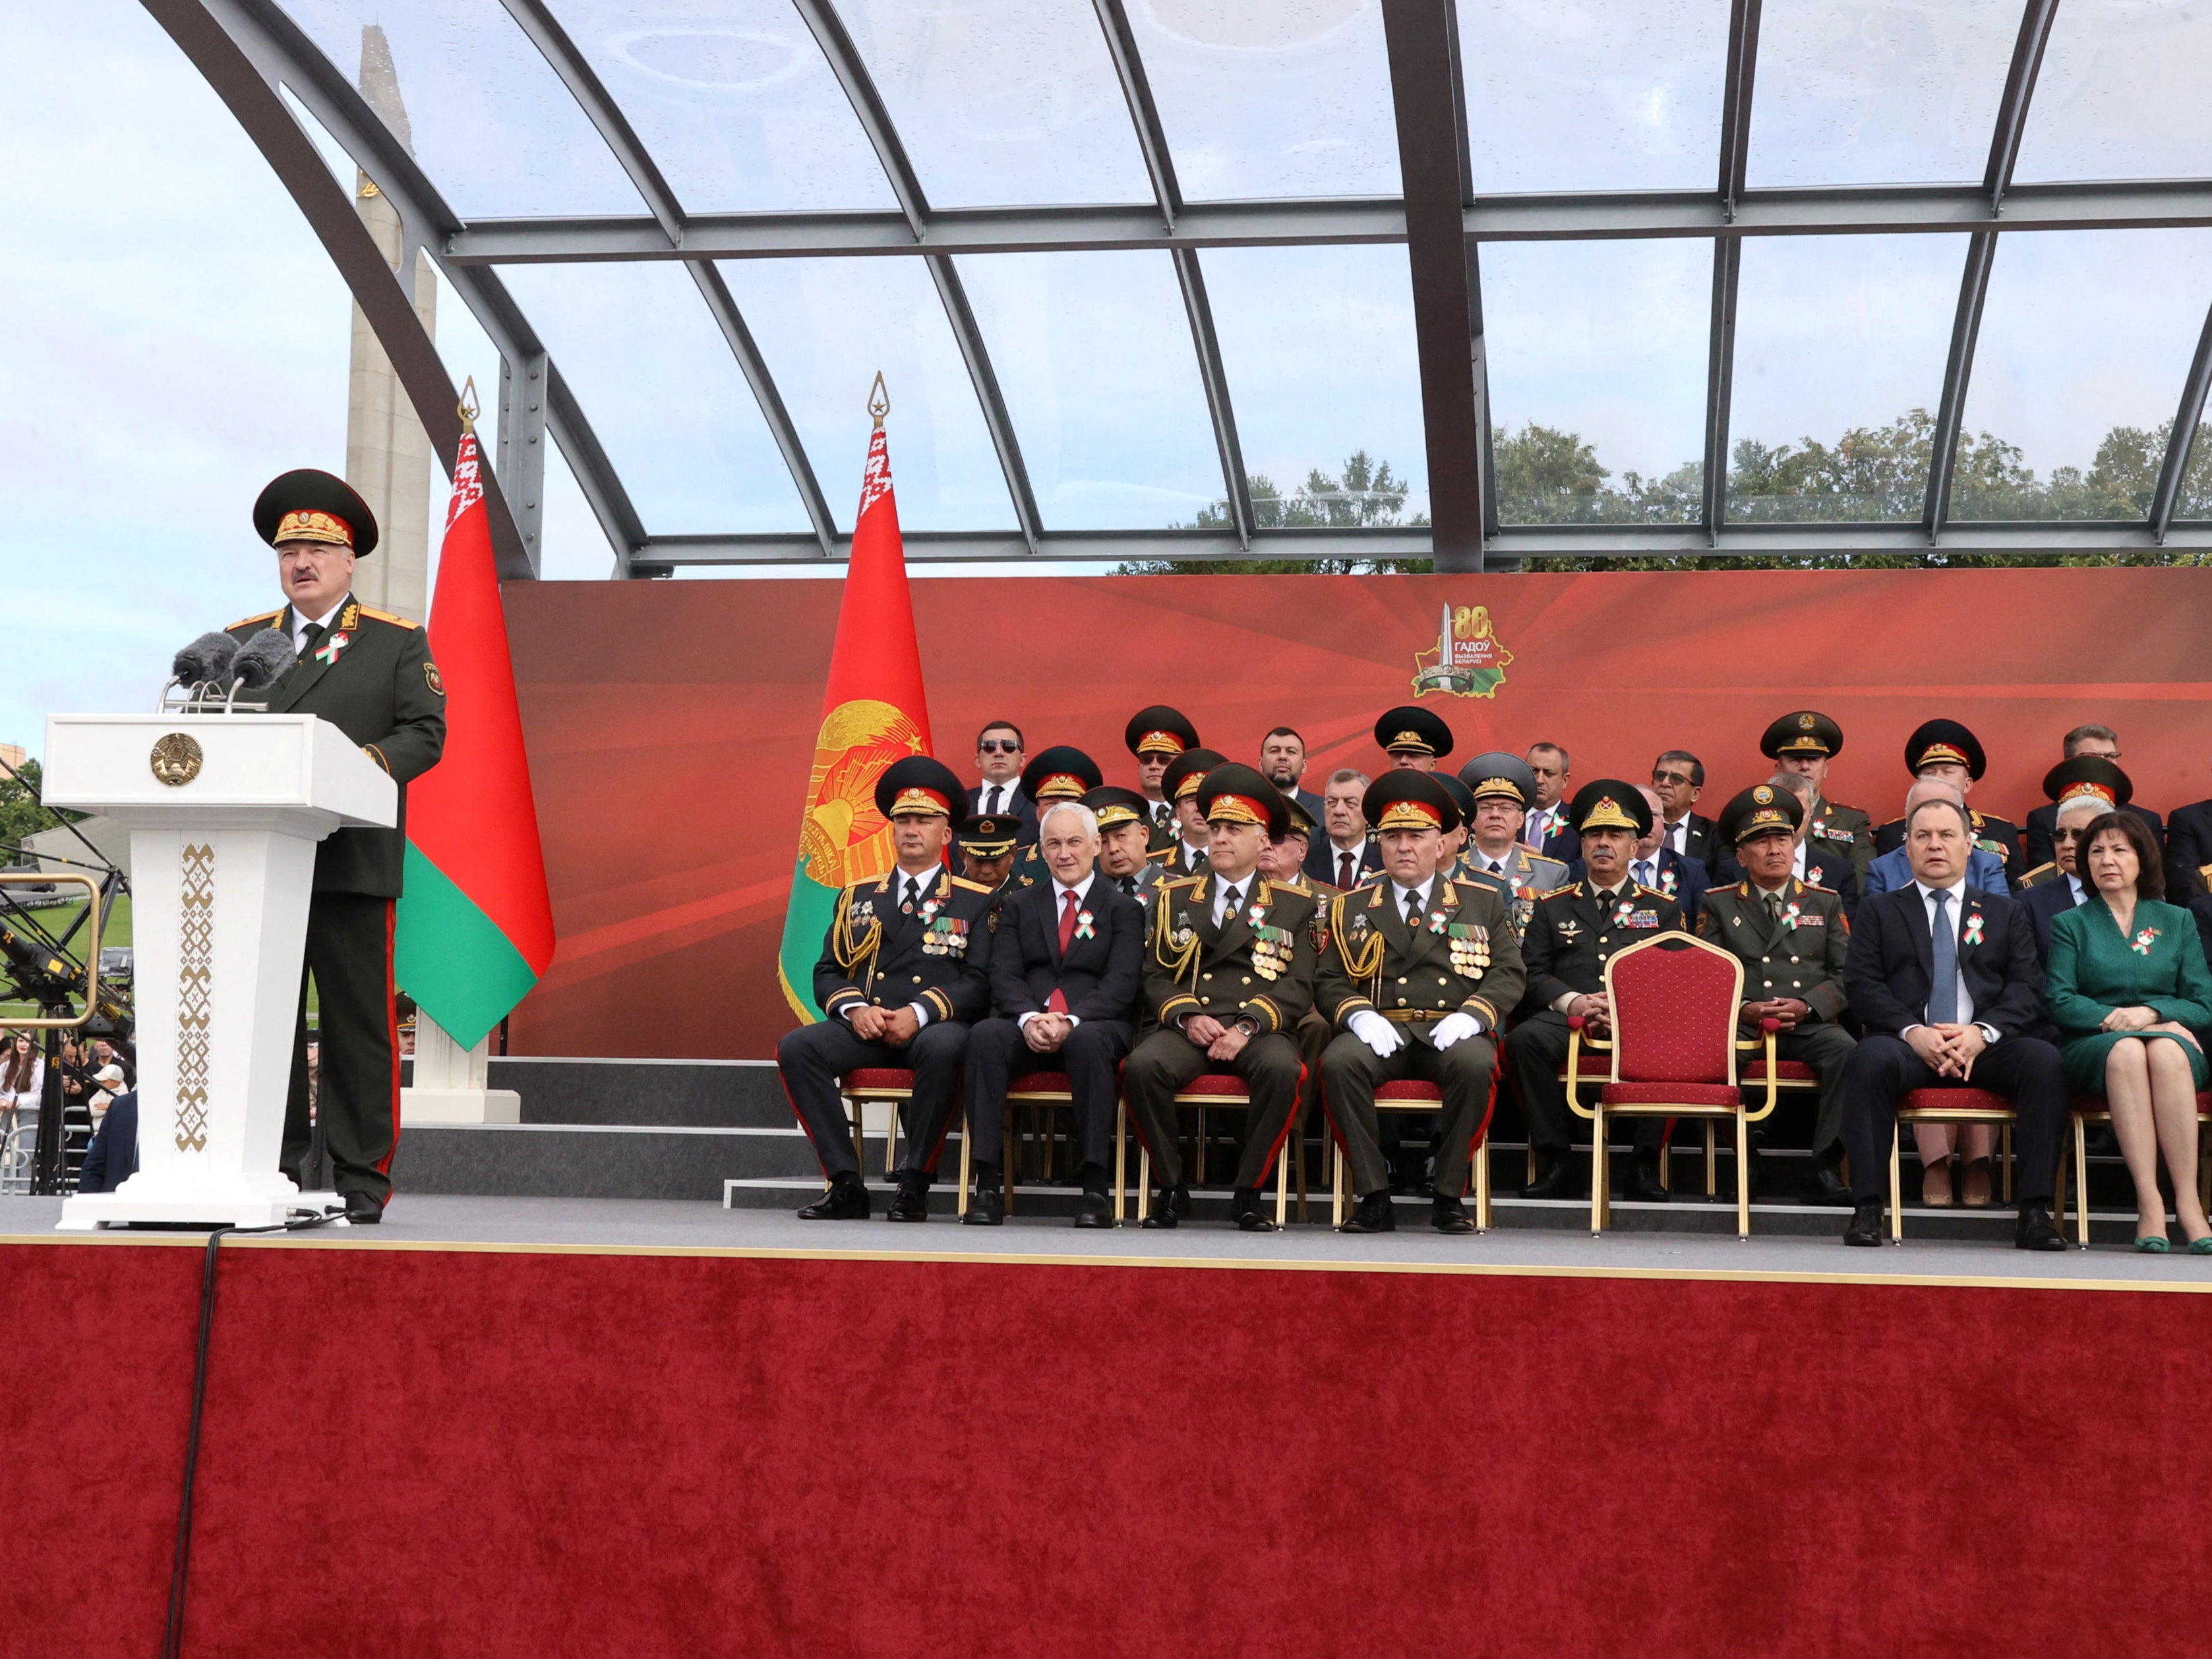 Alexander Lukashenko delivers a speech during a military parade marking independence day and the 80th anniversary of the Soviet liberation of Minsk from the Nazis